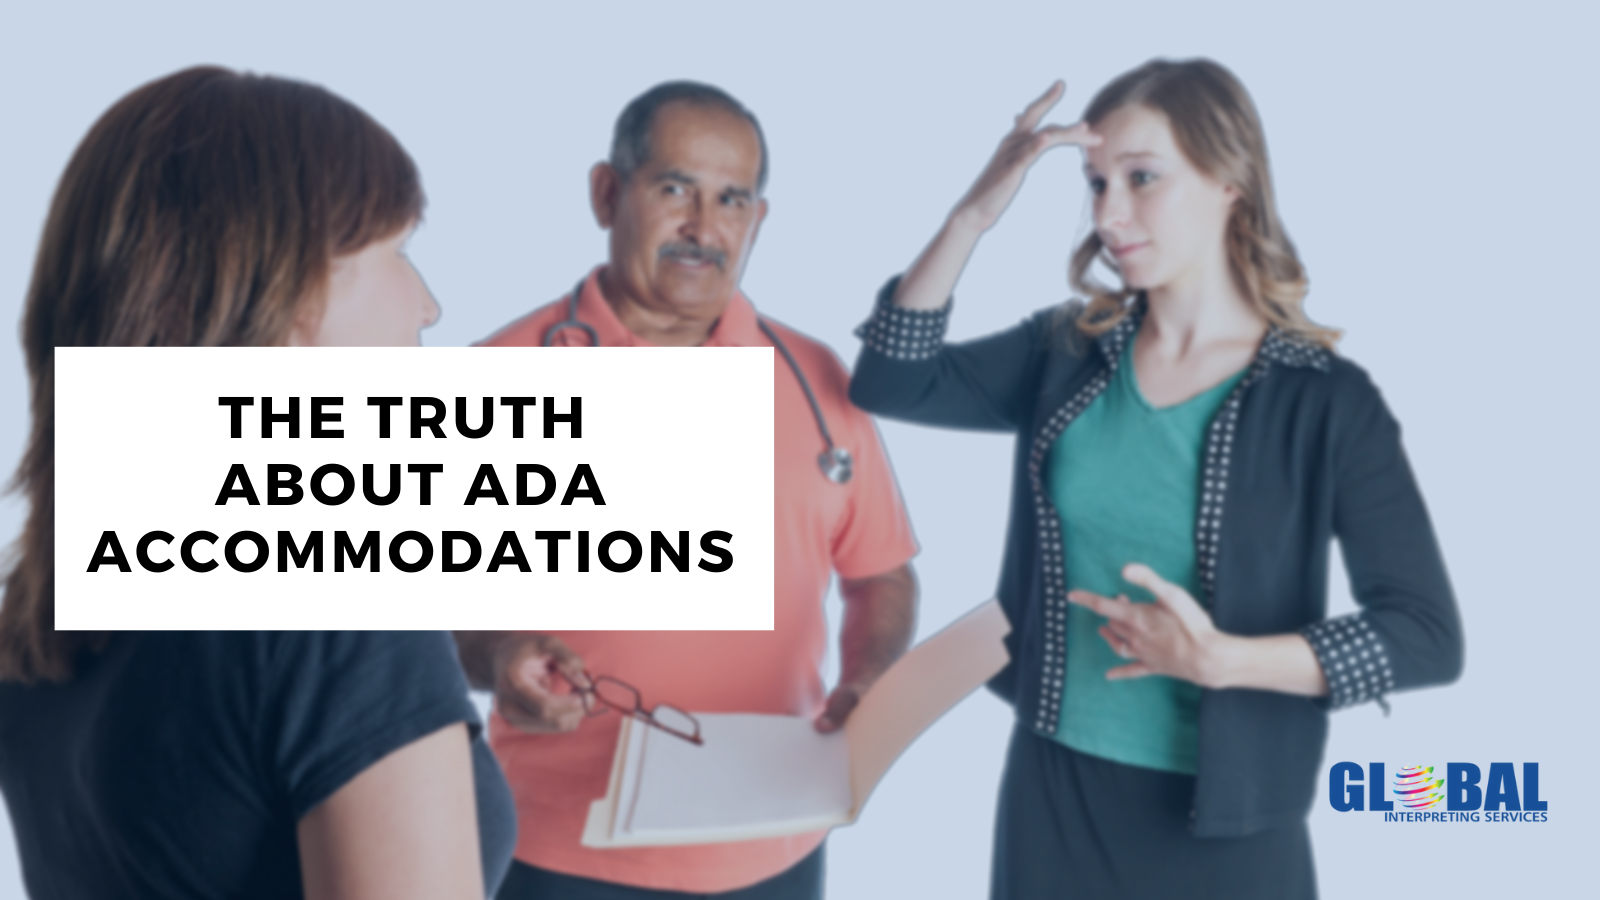 The Truth About ADA Accommodations